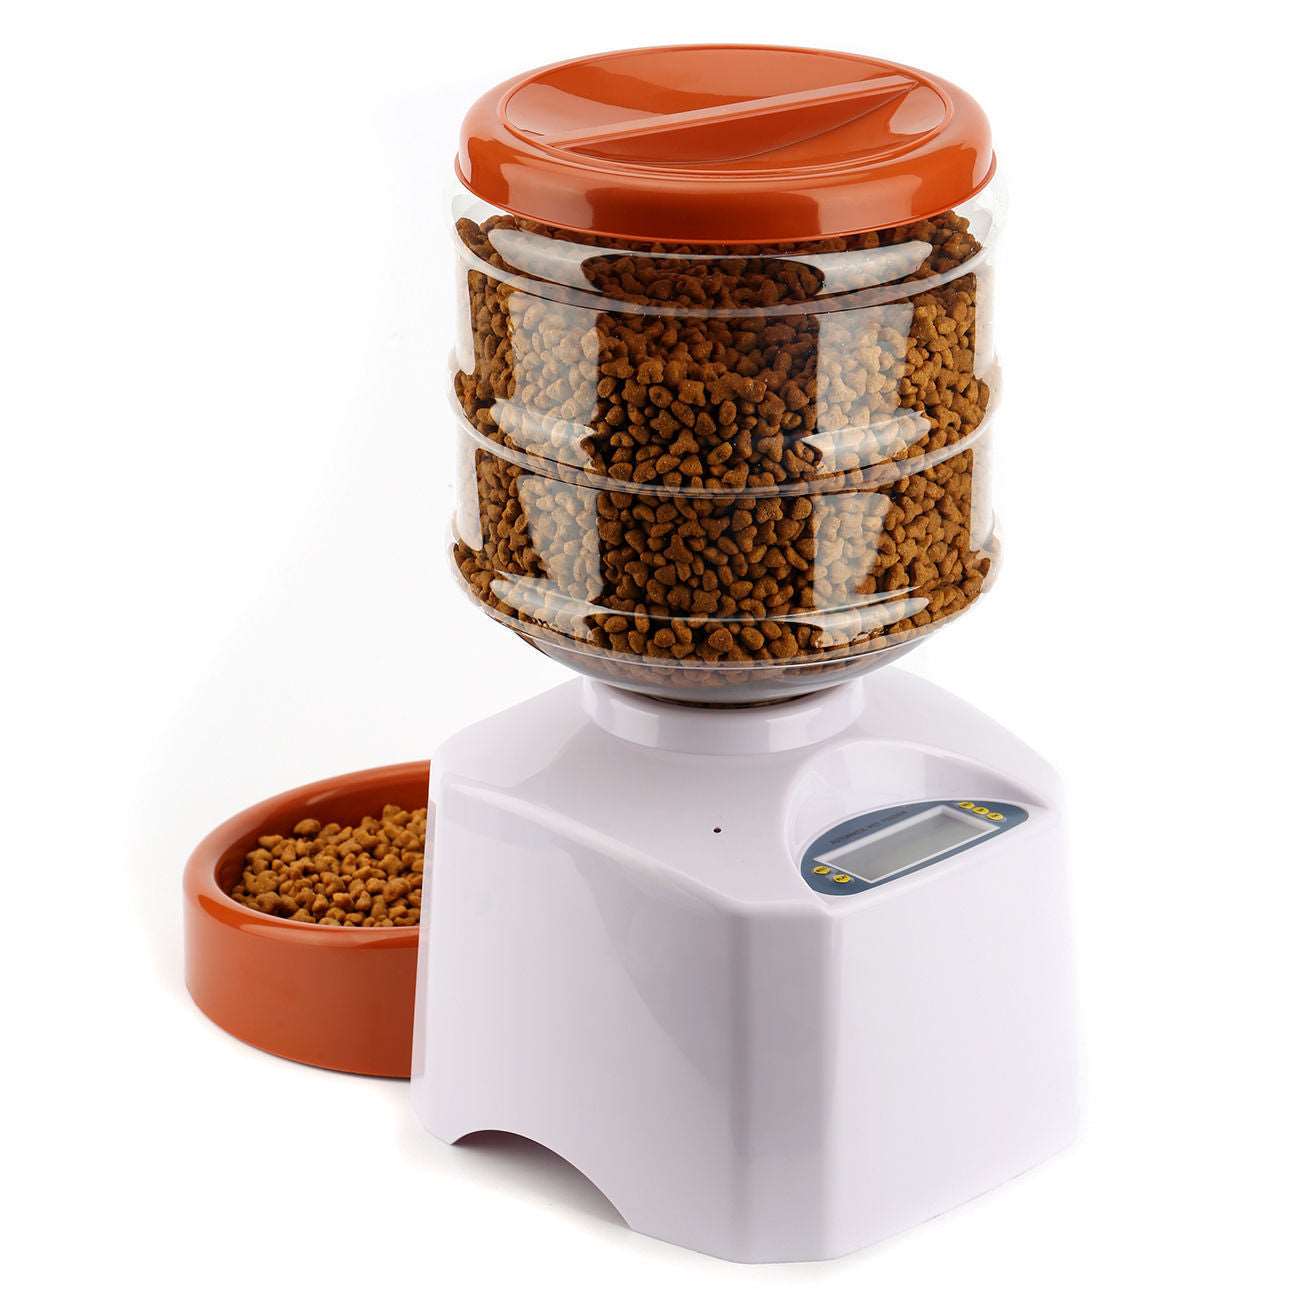 Intelligent Automatic Timing Feeder for Pets Pet feeder